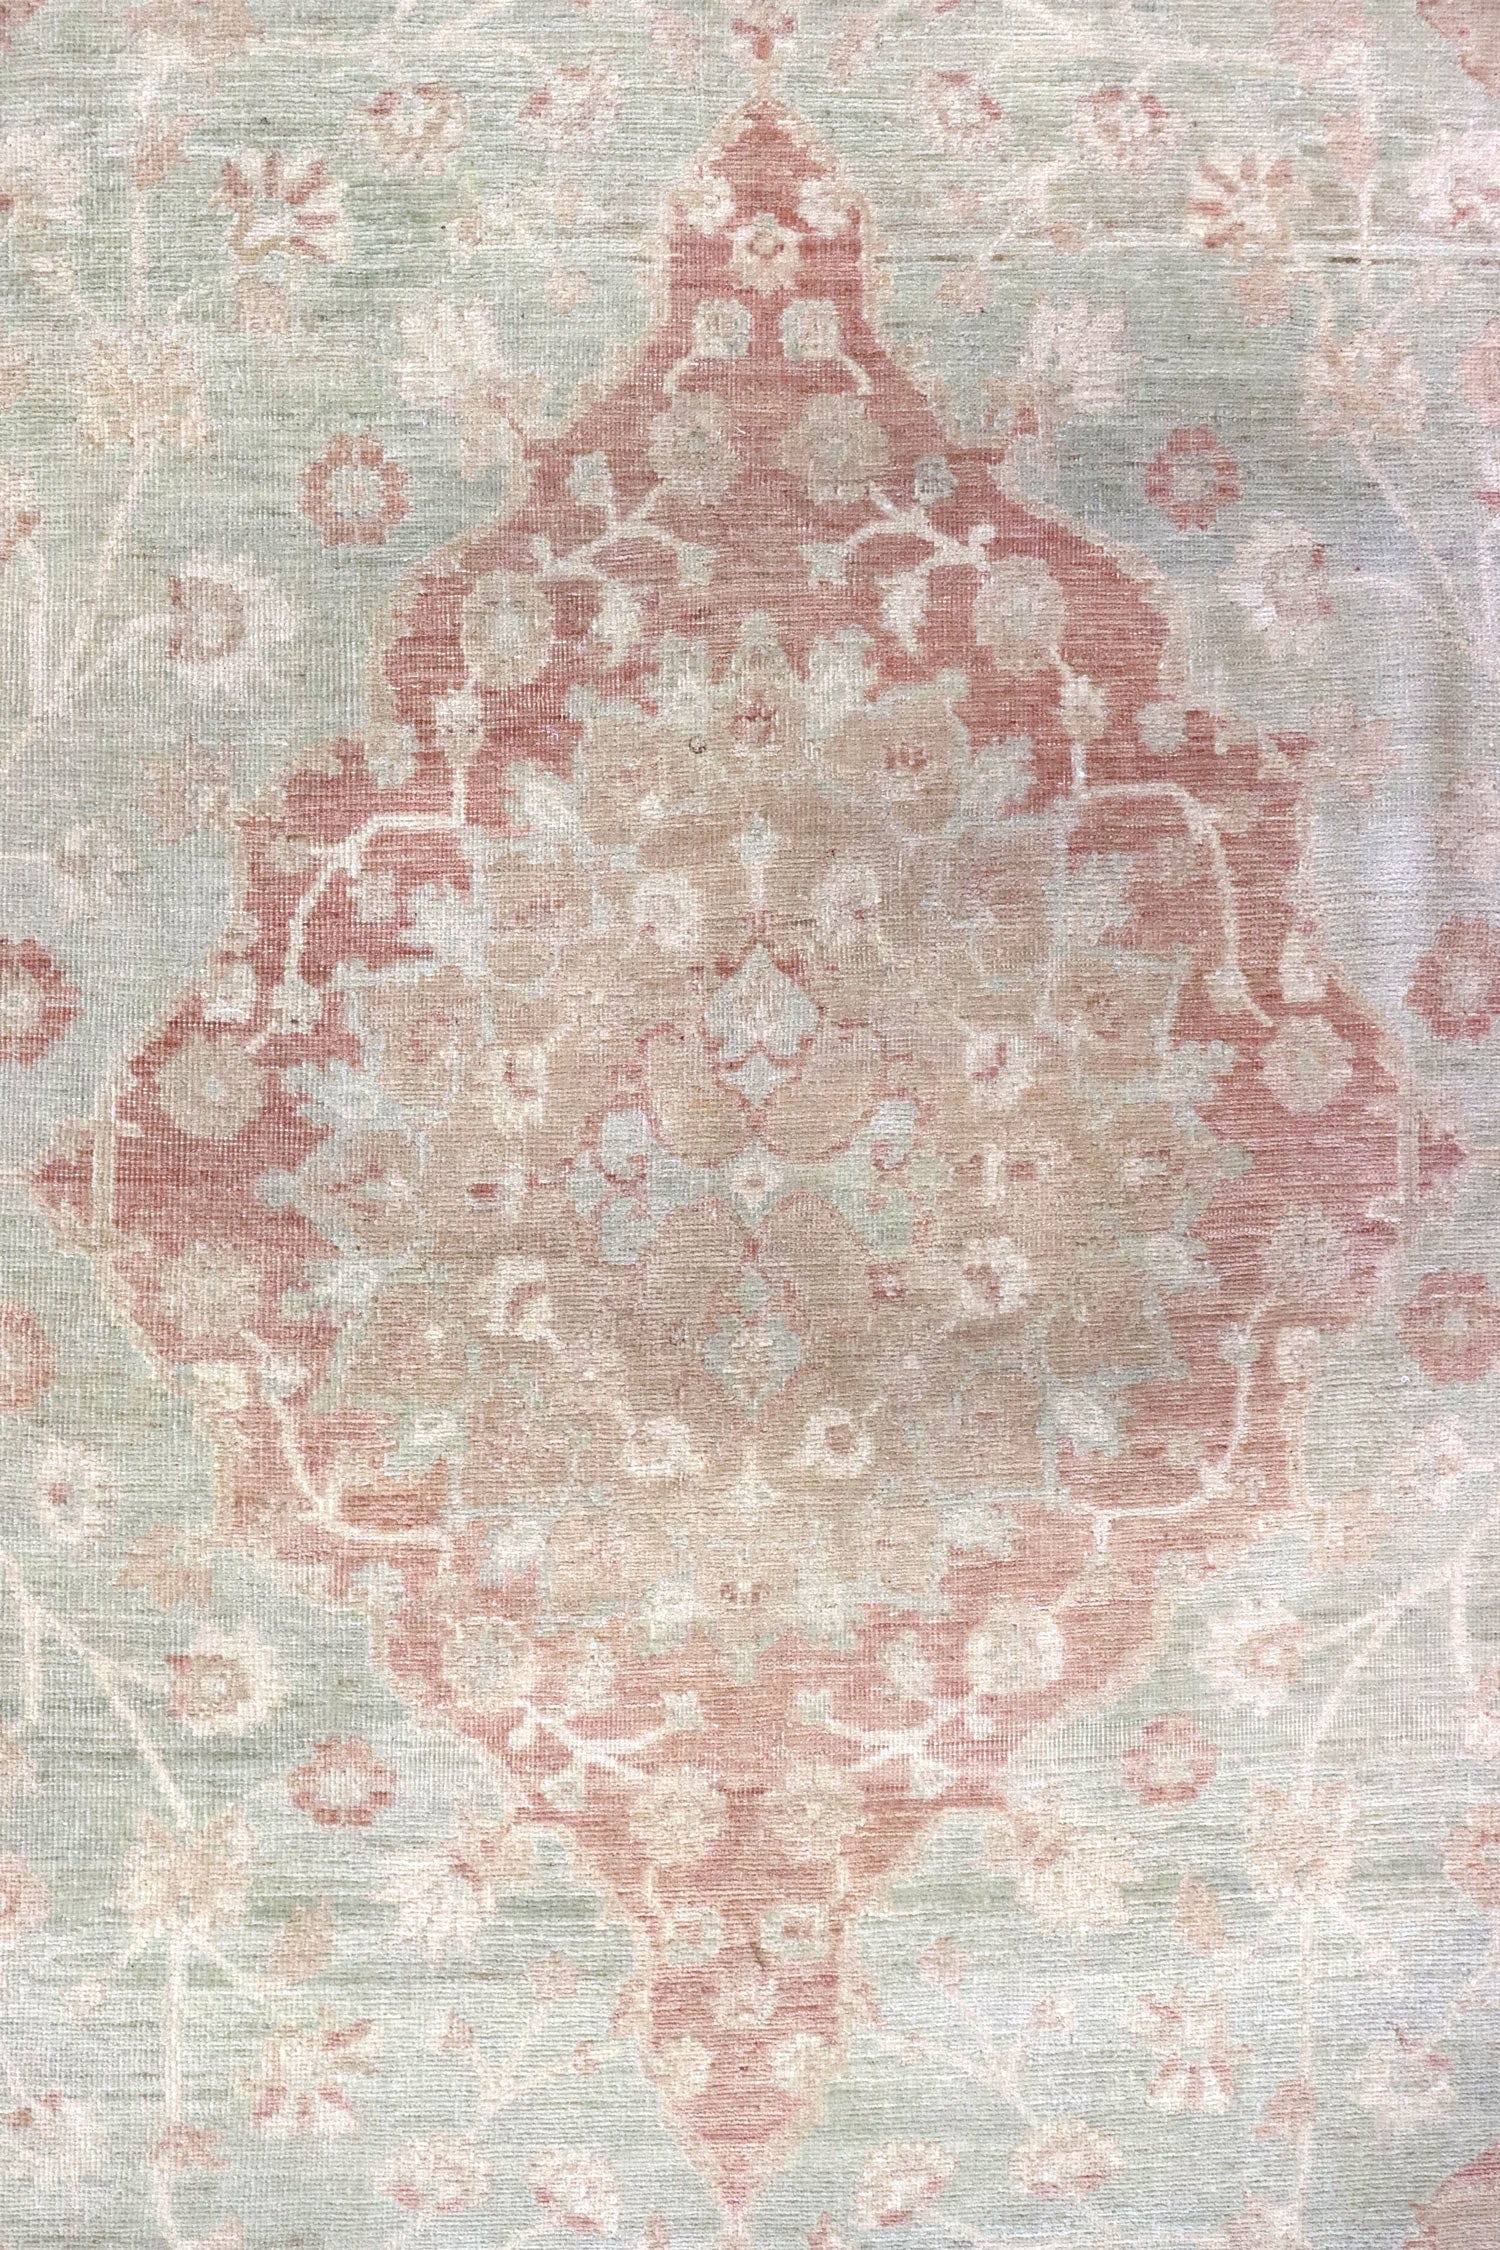 Sultanabad Handwoven Transitional Rug, J63847